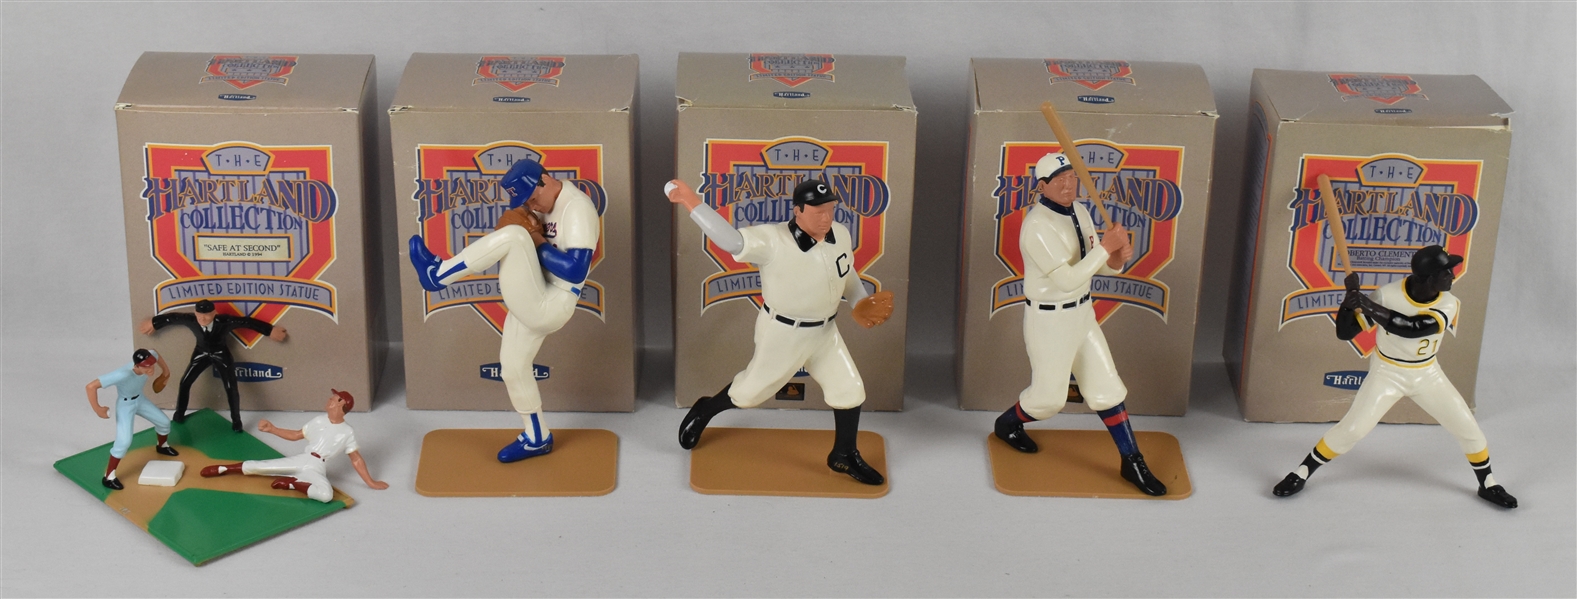 Rare 1991 Hartland Limited Edition Statues w/Wagner Clemente Cy Young & Nolan Ryan